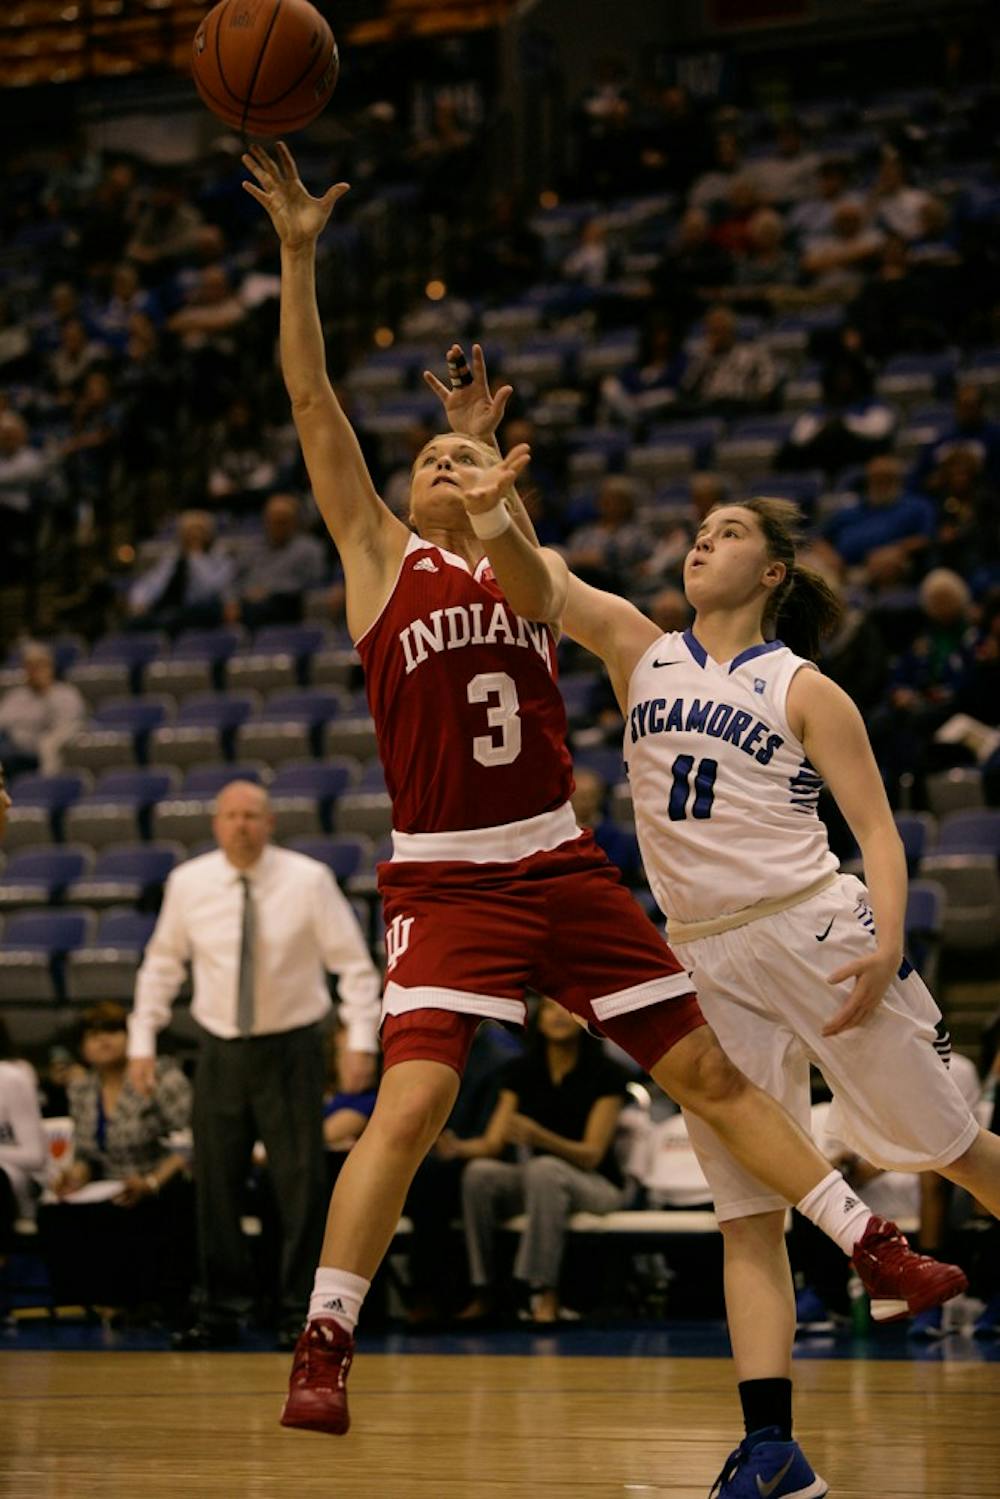 Sophomore guard Tyra Buss goes for a layup against Indiana State. Buss led the Hoosiers in scoring with 15 points put up against the Sycamores to secure a 53-50 victory for IU. 